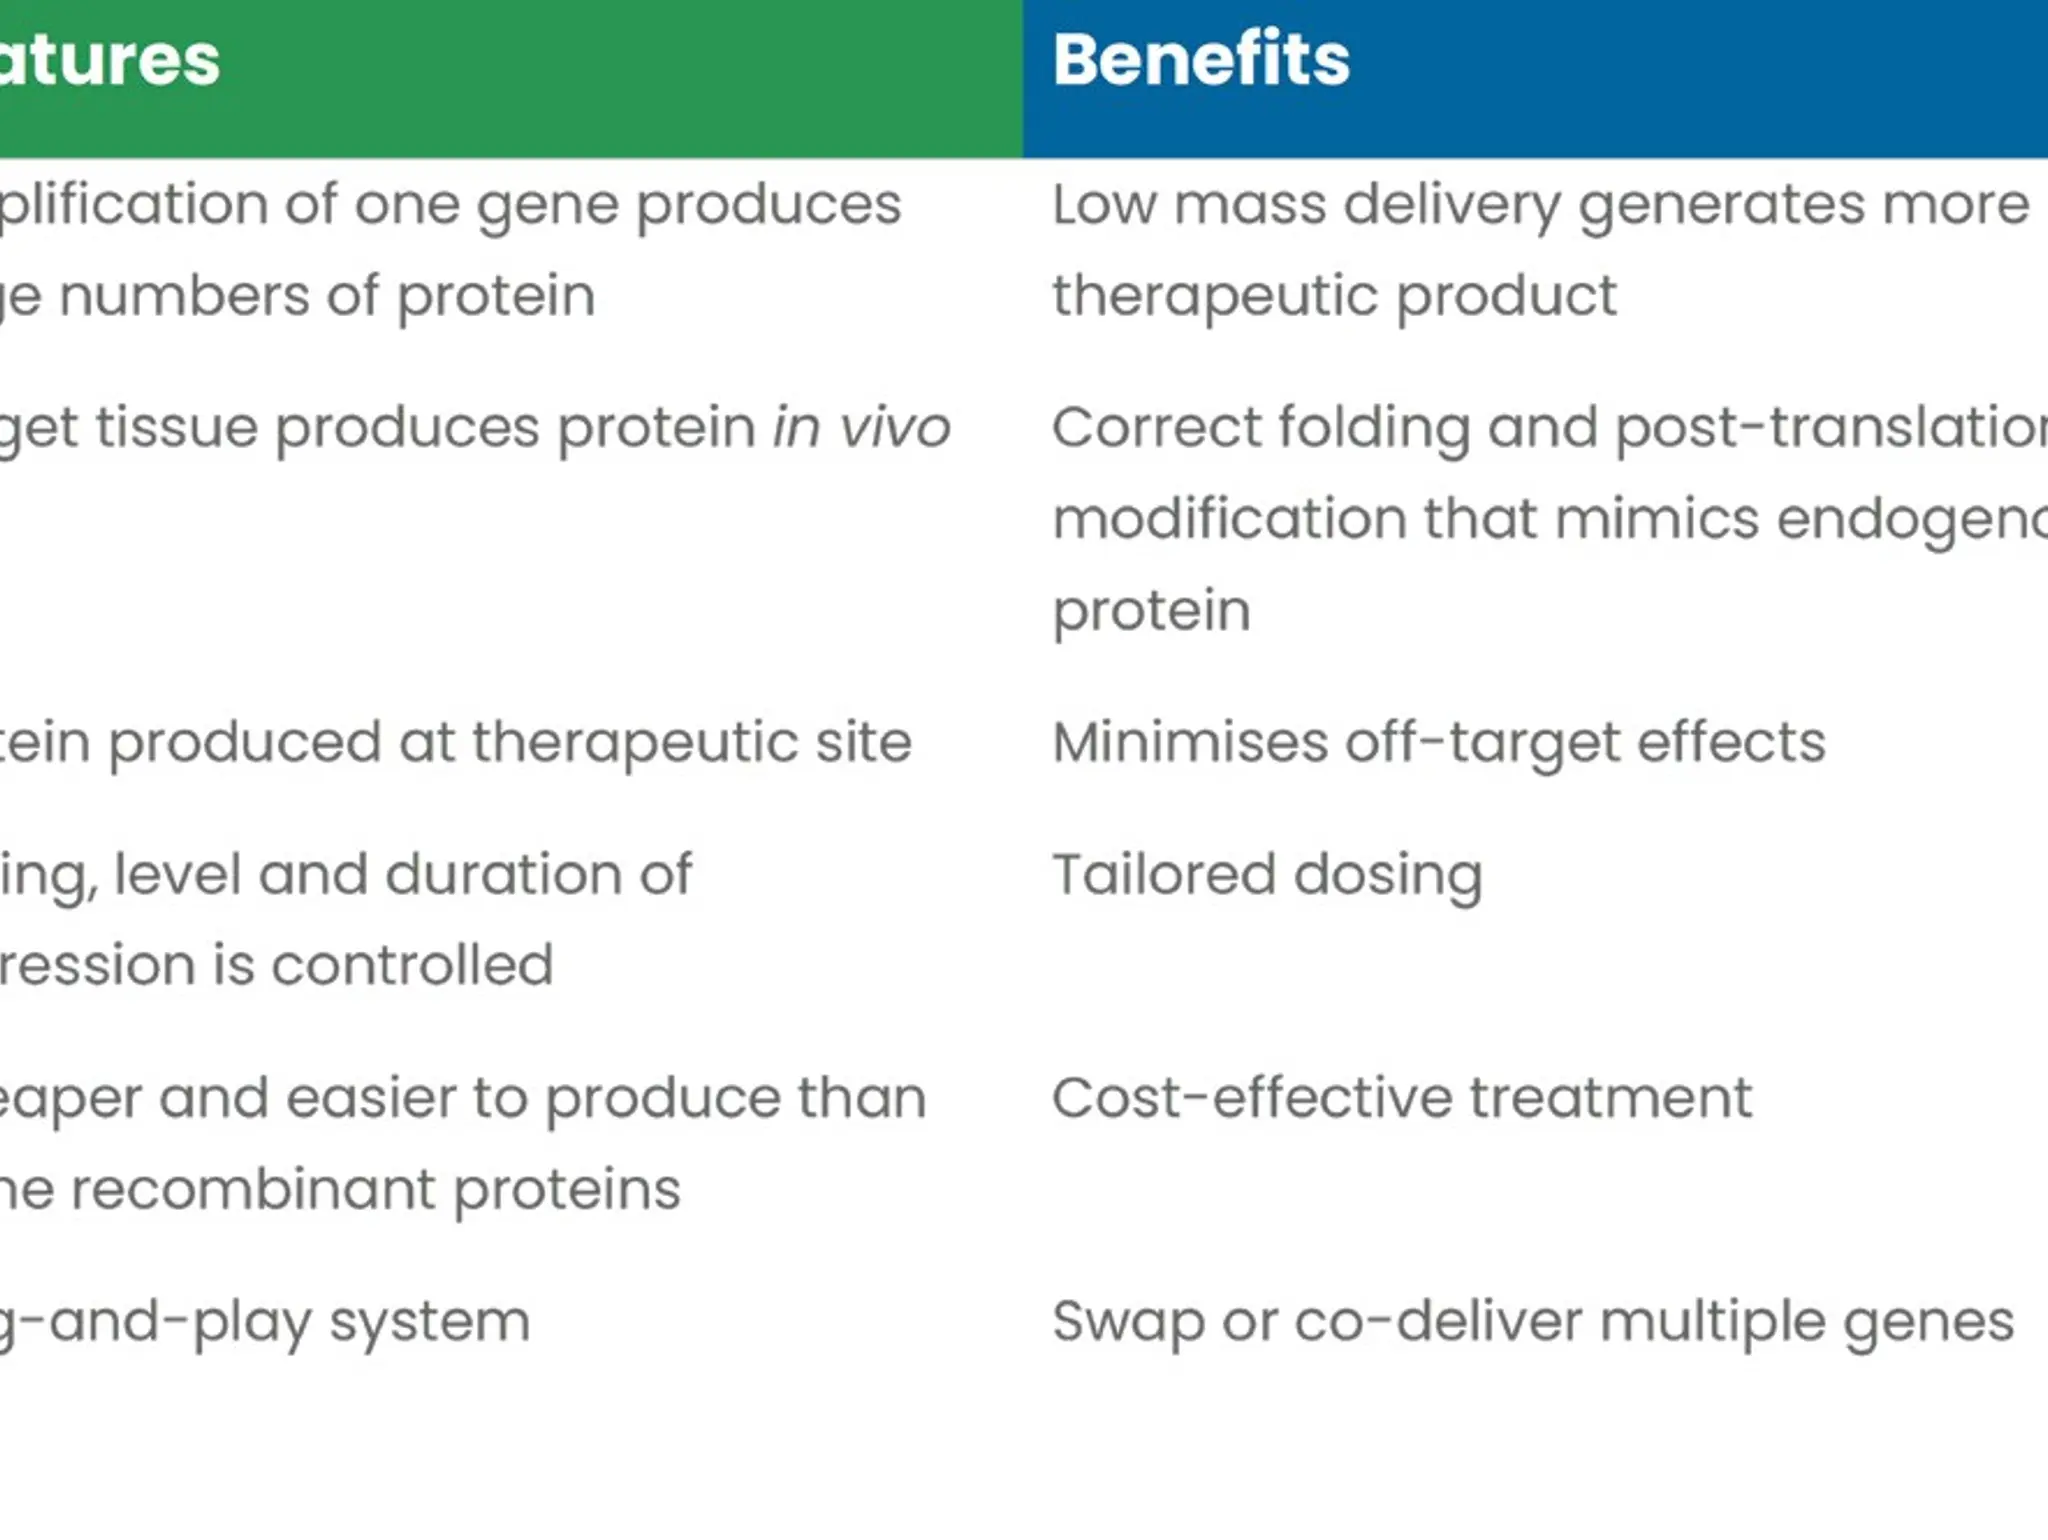 Non-viral gene therapies: GETting growth-factor-based healing right in orthopaedics